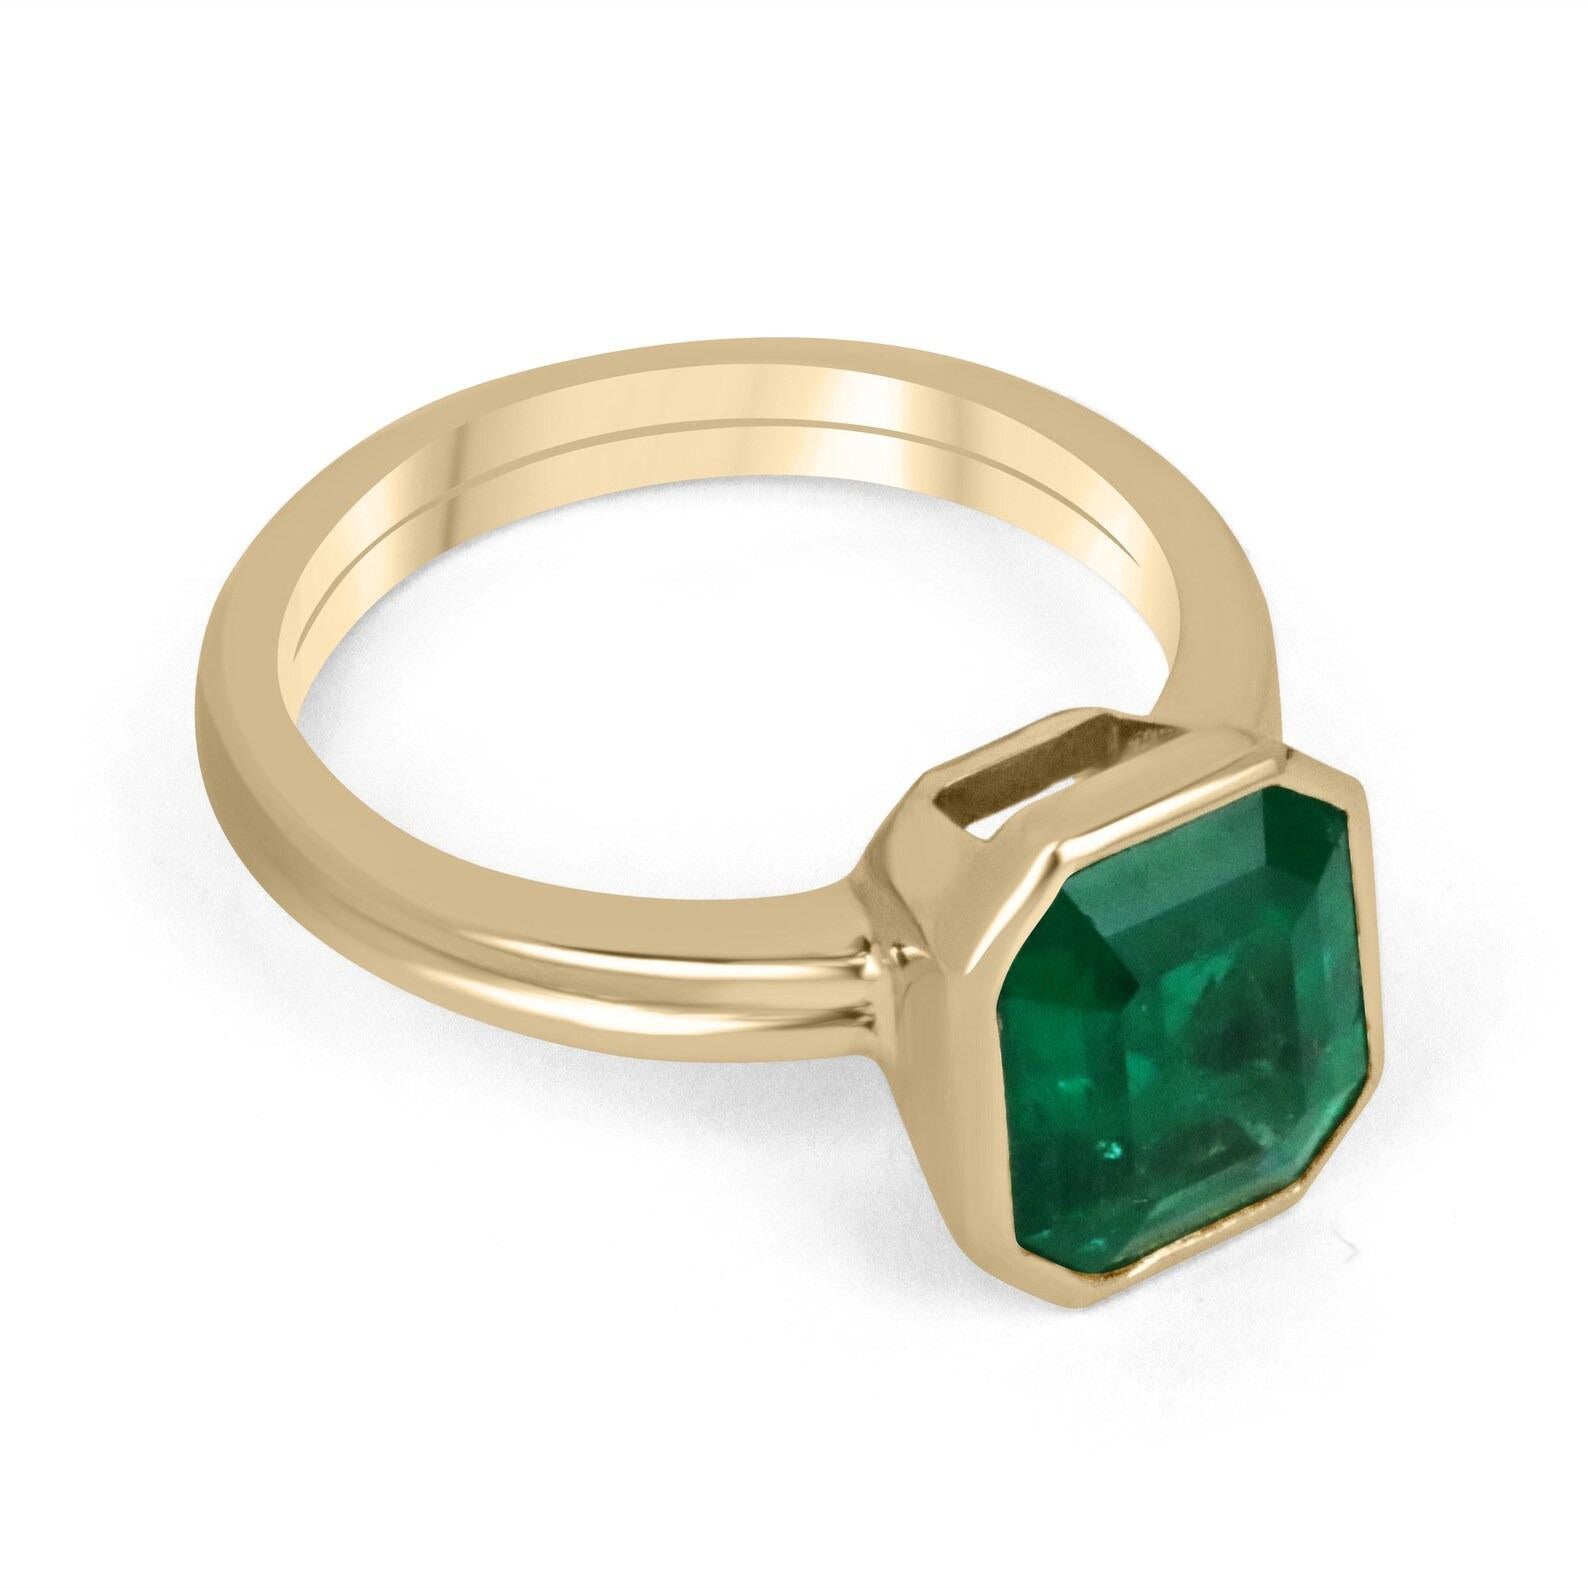 Displayed is a rich dark green Colombian emerald, solitaire, emerald-cut bezel ring in solid 18K yellow gold. This gorgeous solitaire ring carries a full 3.20-carat earth-mined emerald in a sleek and secure bezel setting. The emerald has incredible